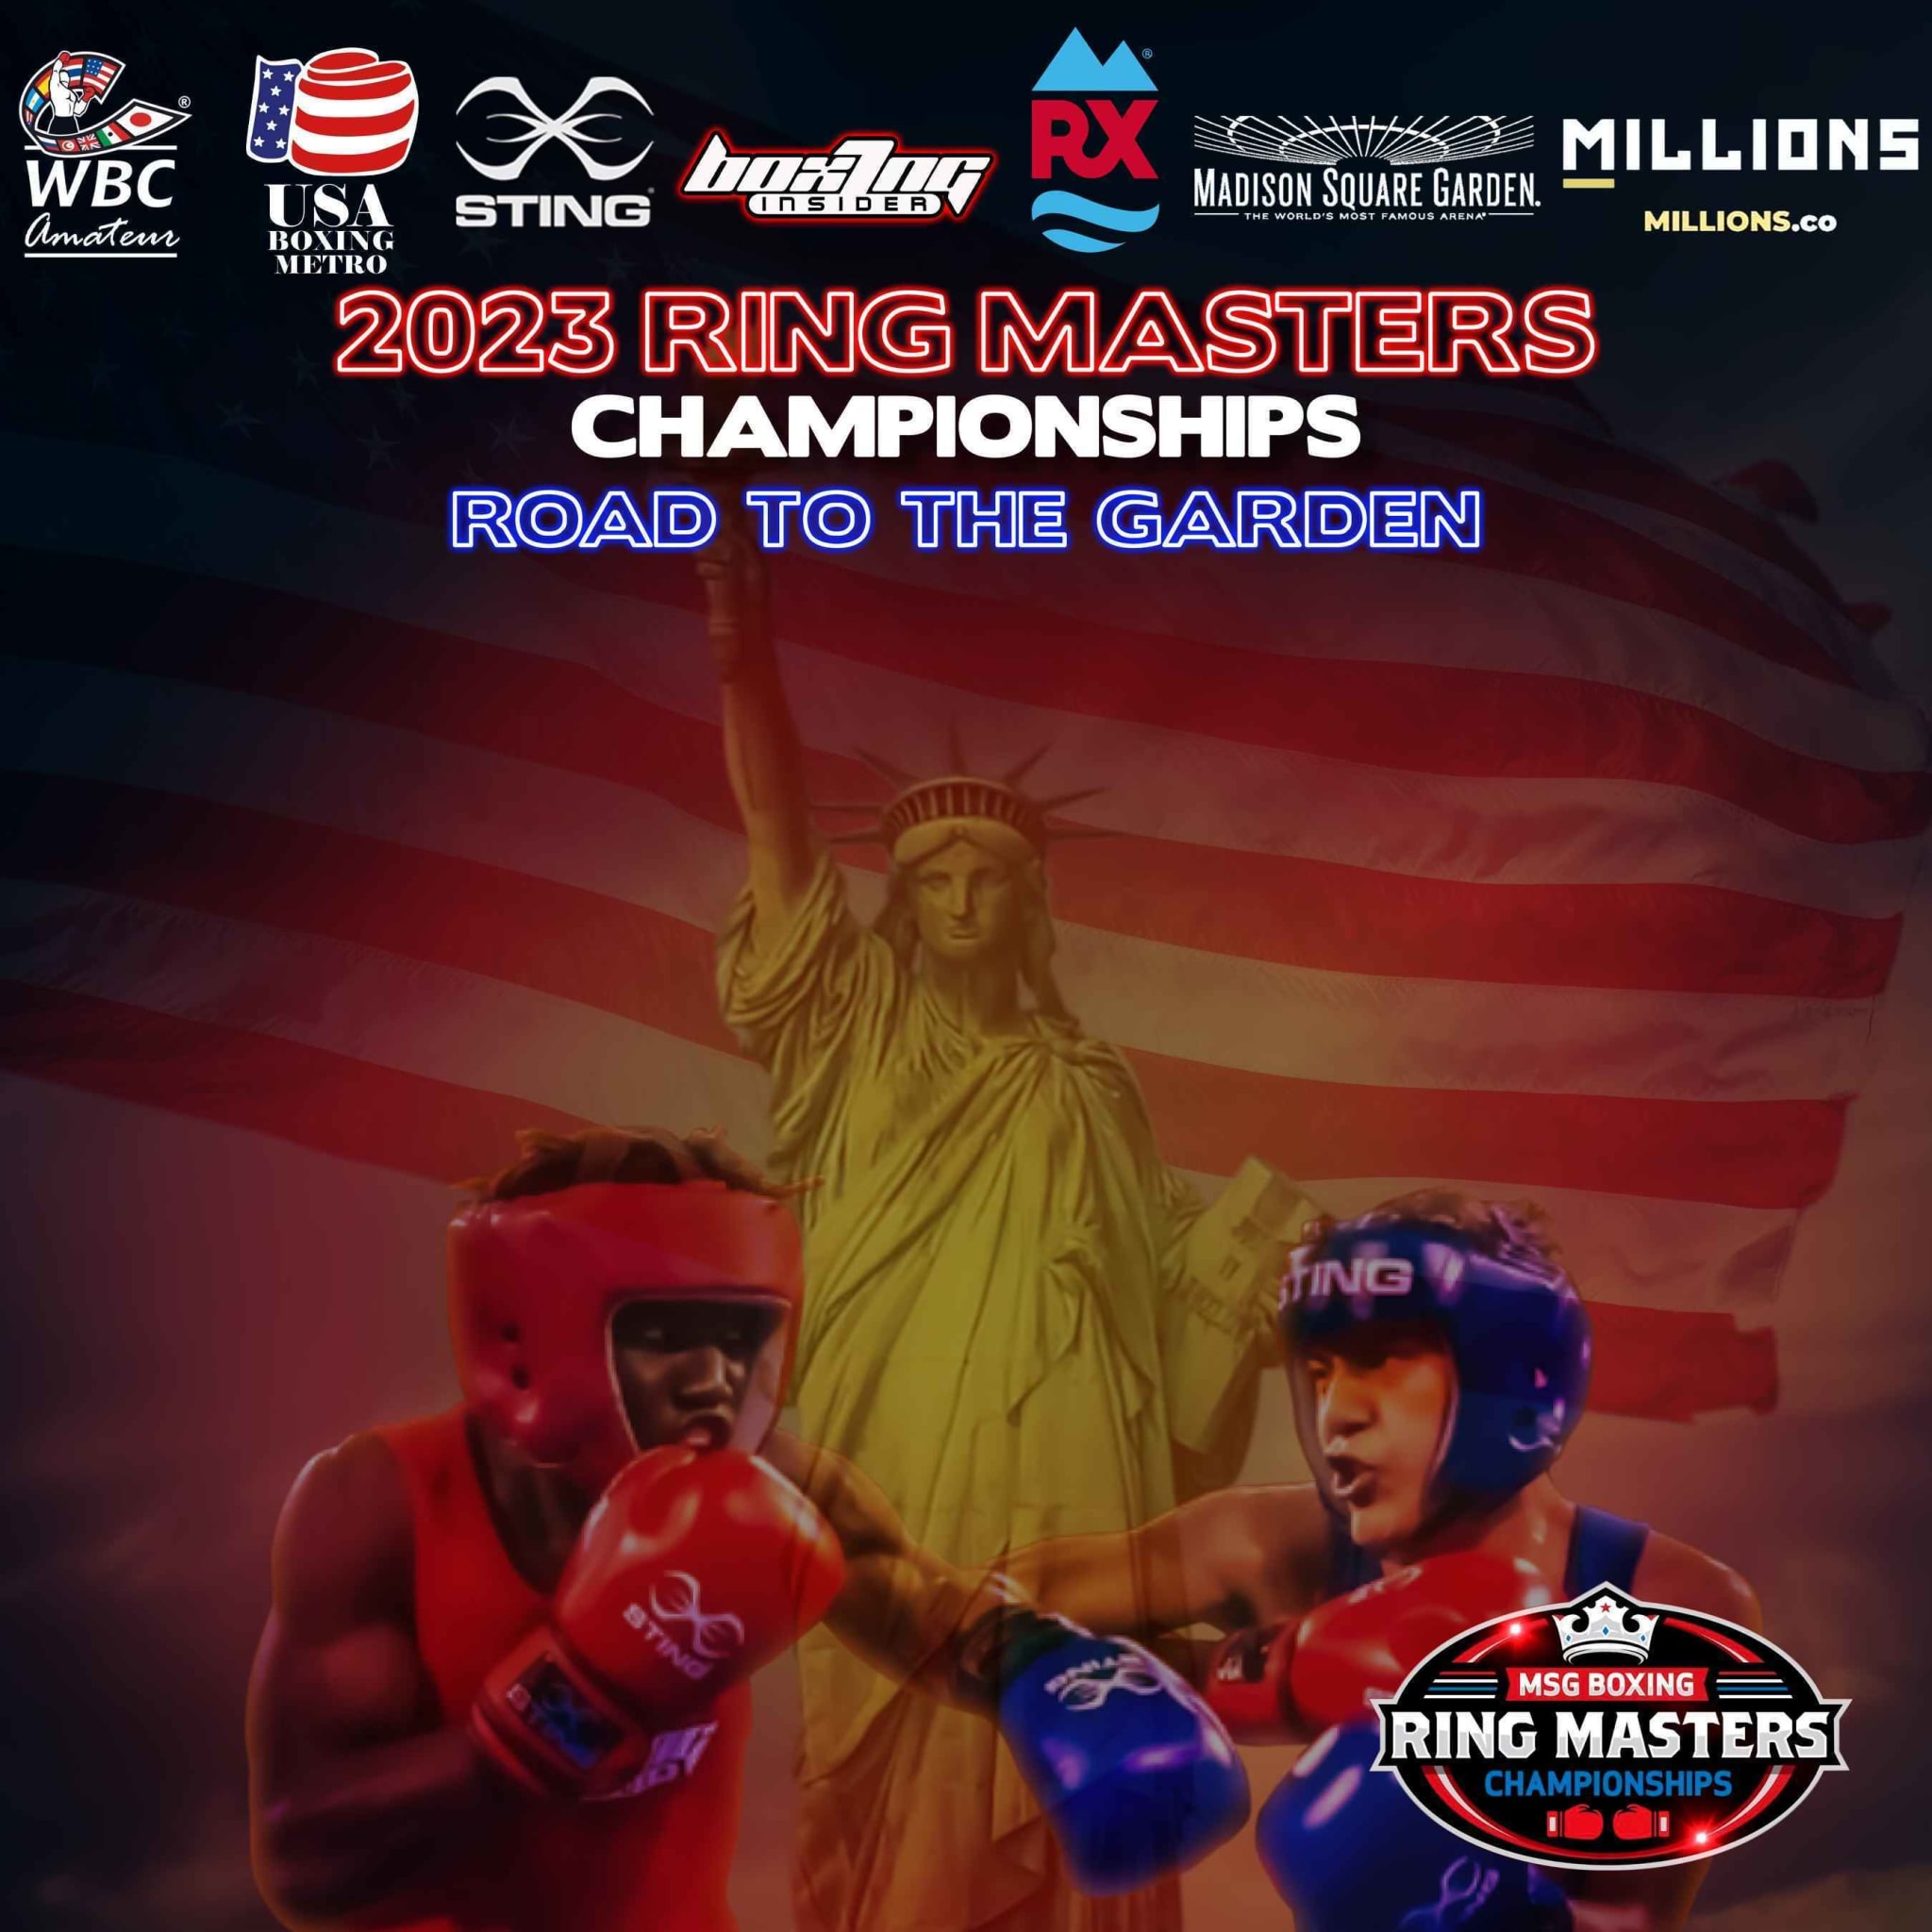 2023 Ring Masters Championships! Road to the Garden!